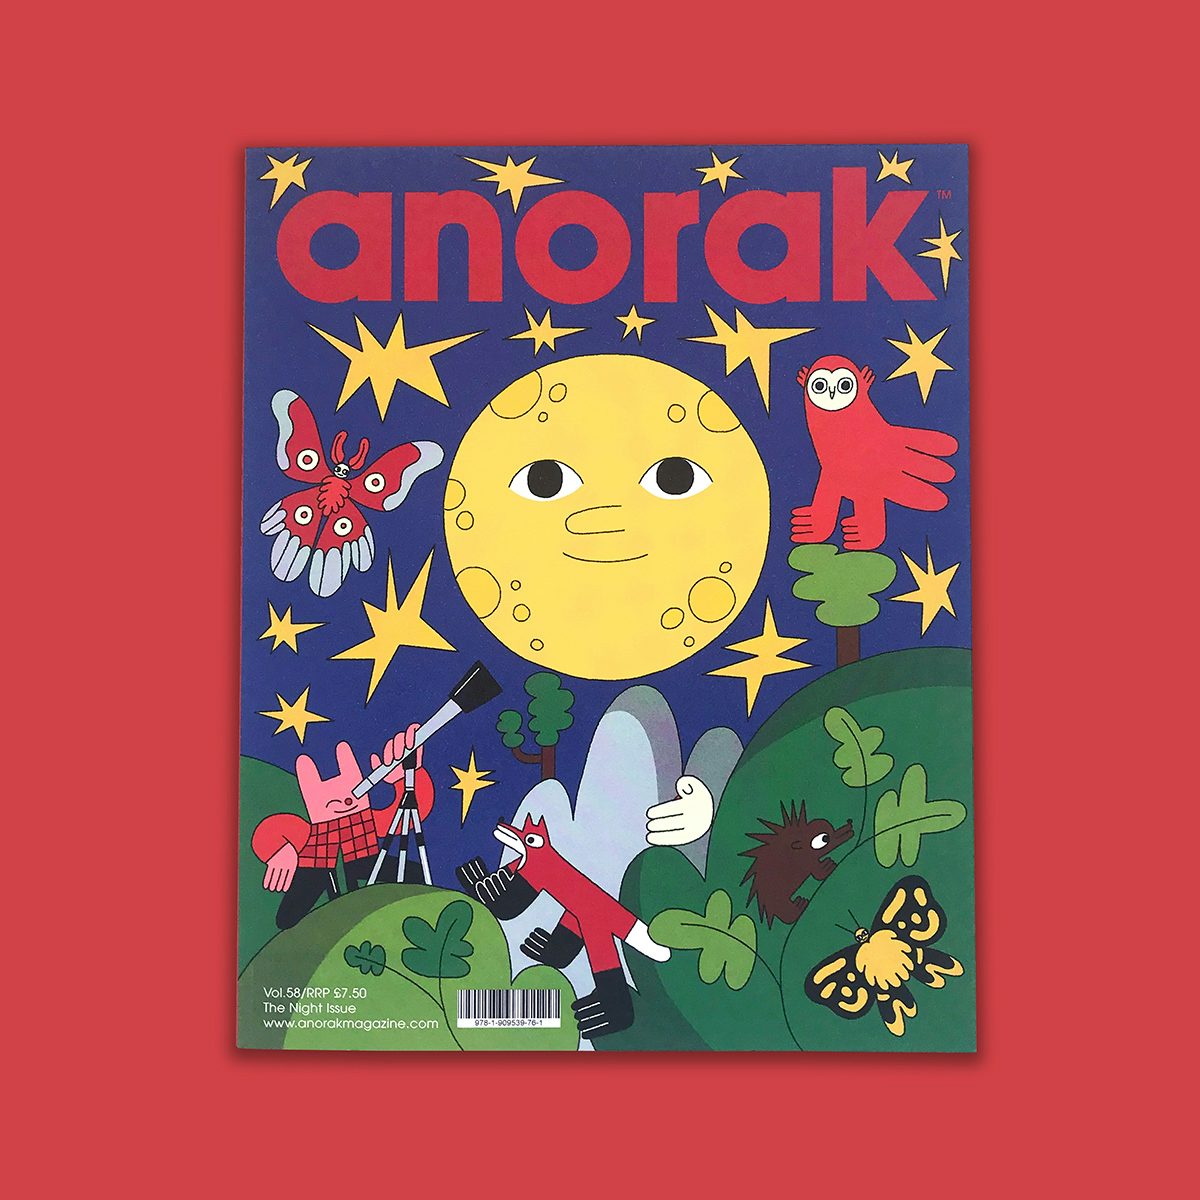 Photograph of an illustration by Aysha Tengiz on the cover of Anorak magazine